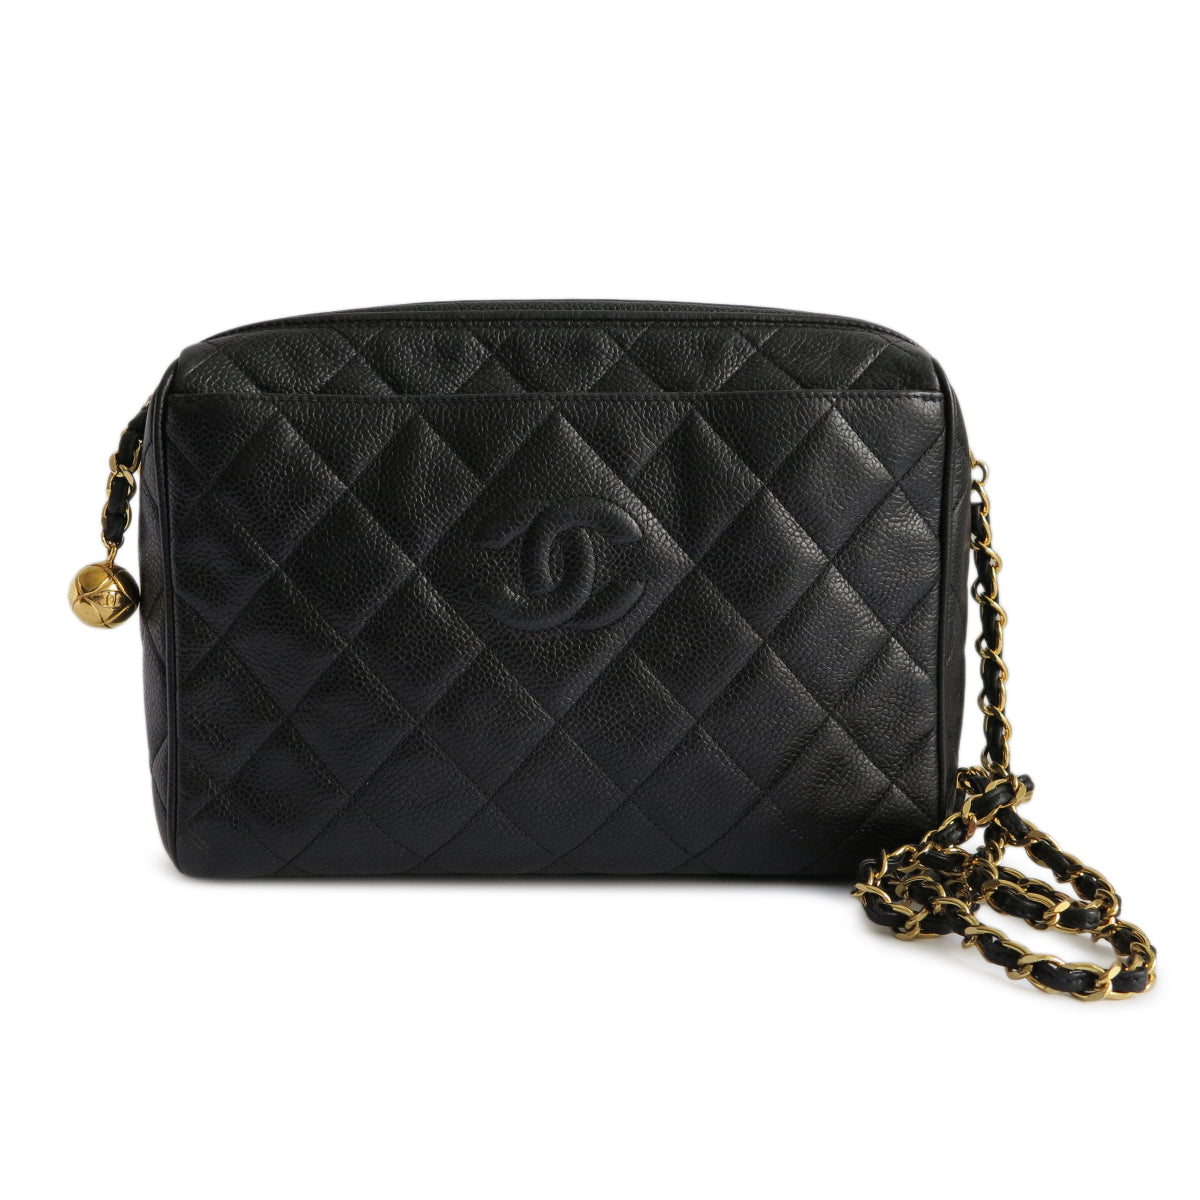 Chanel Vintage Caviar Leather Chain Pouch